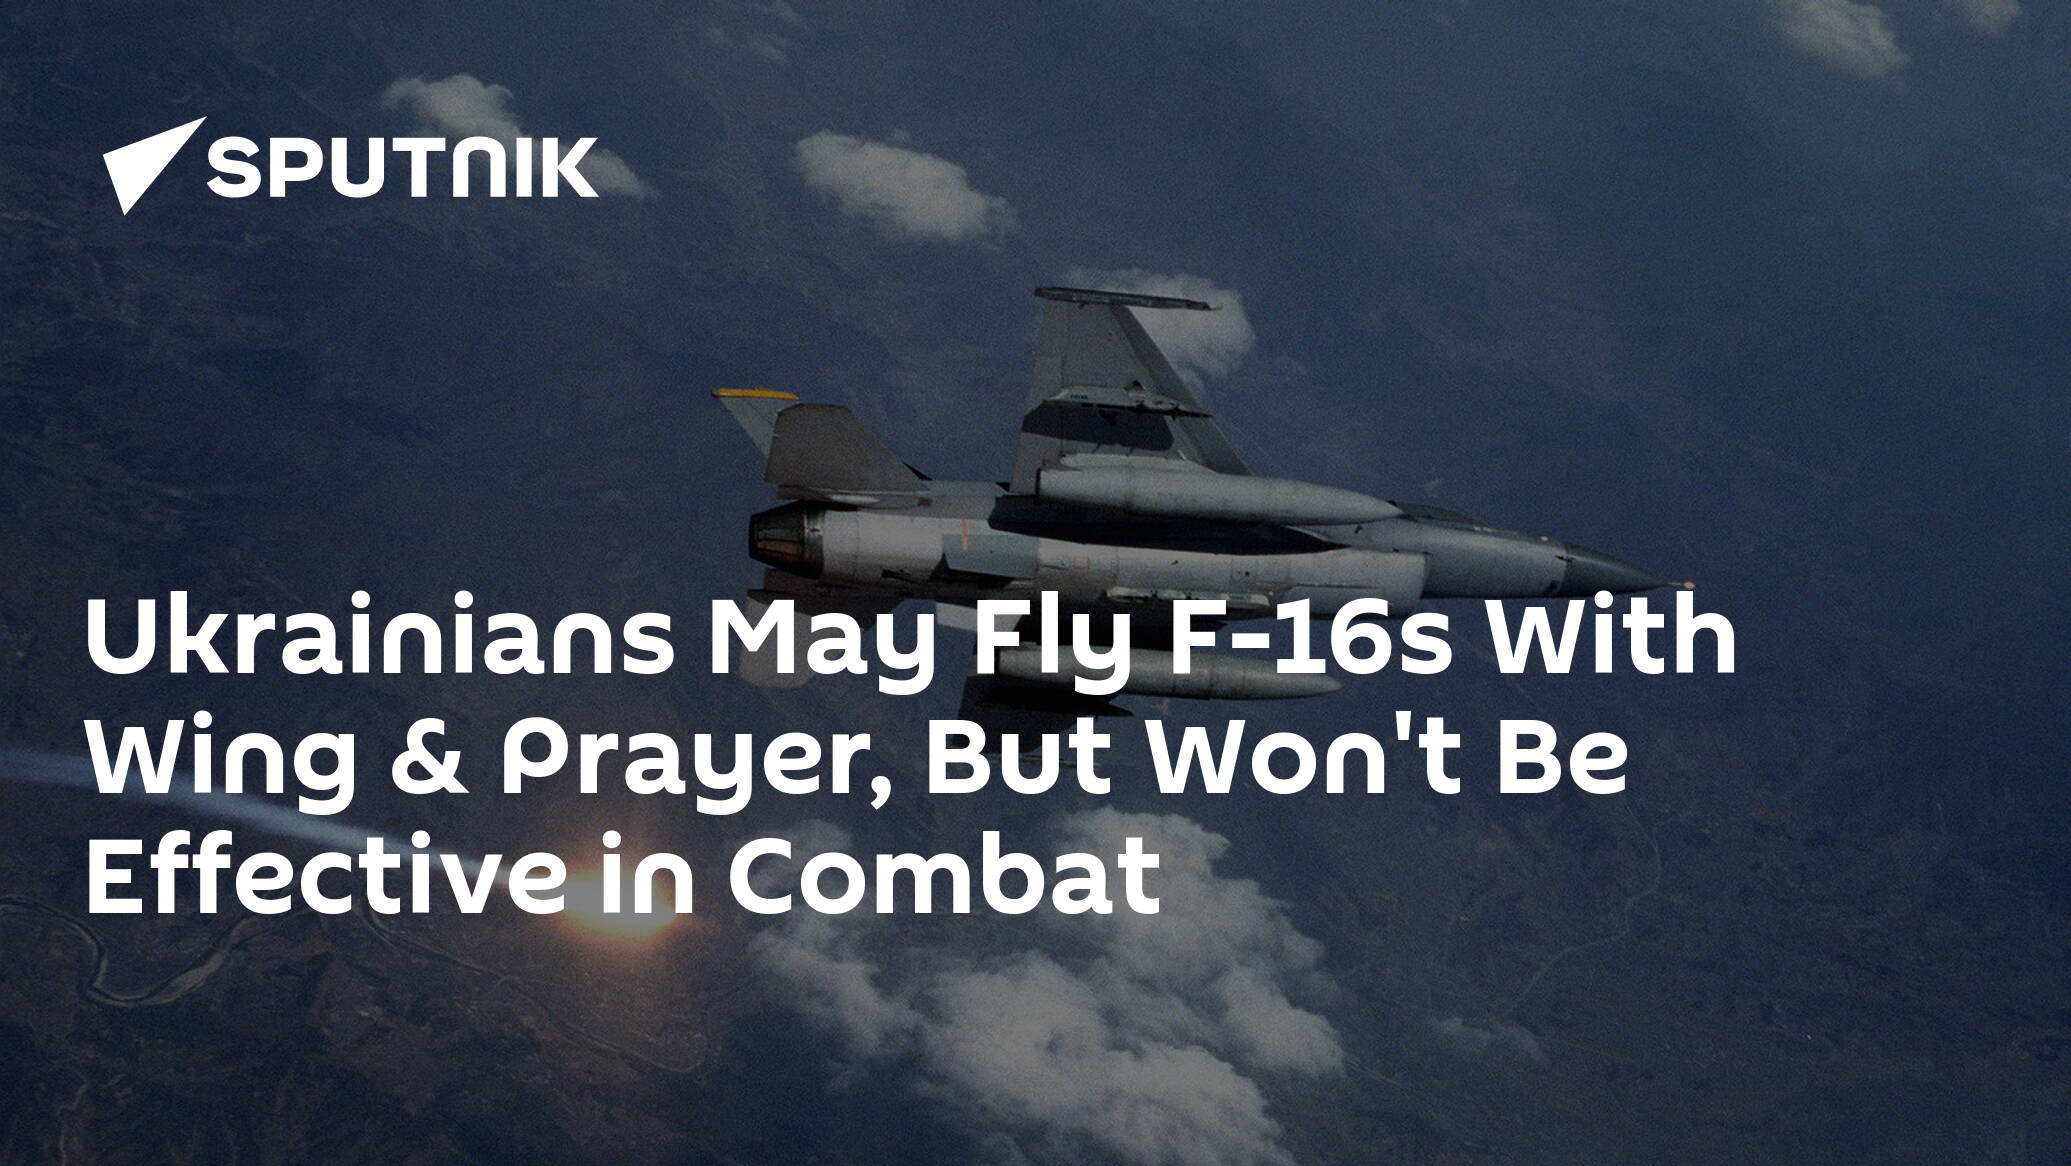 Ukrainians May Fly F-16s With Wing & Prayer, But Won't Be Effective in Combat